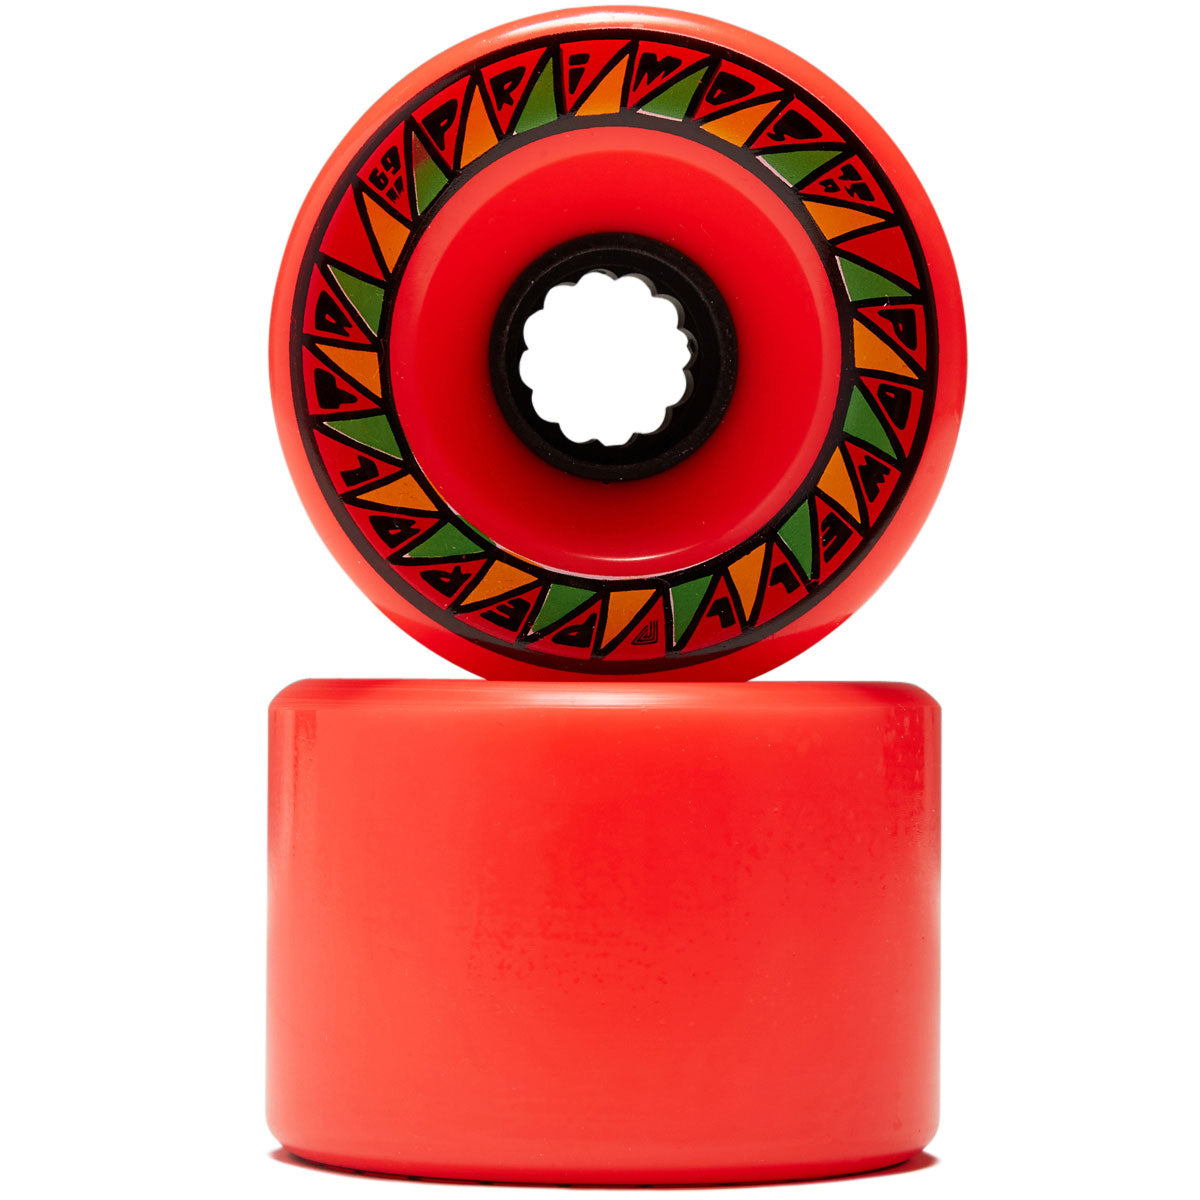 Powell-Peralta Primo 75a Longboard Wheels - Red - 69mm image 2